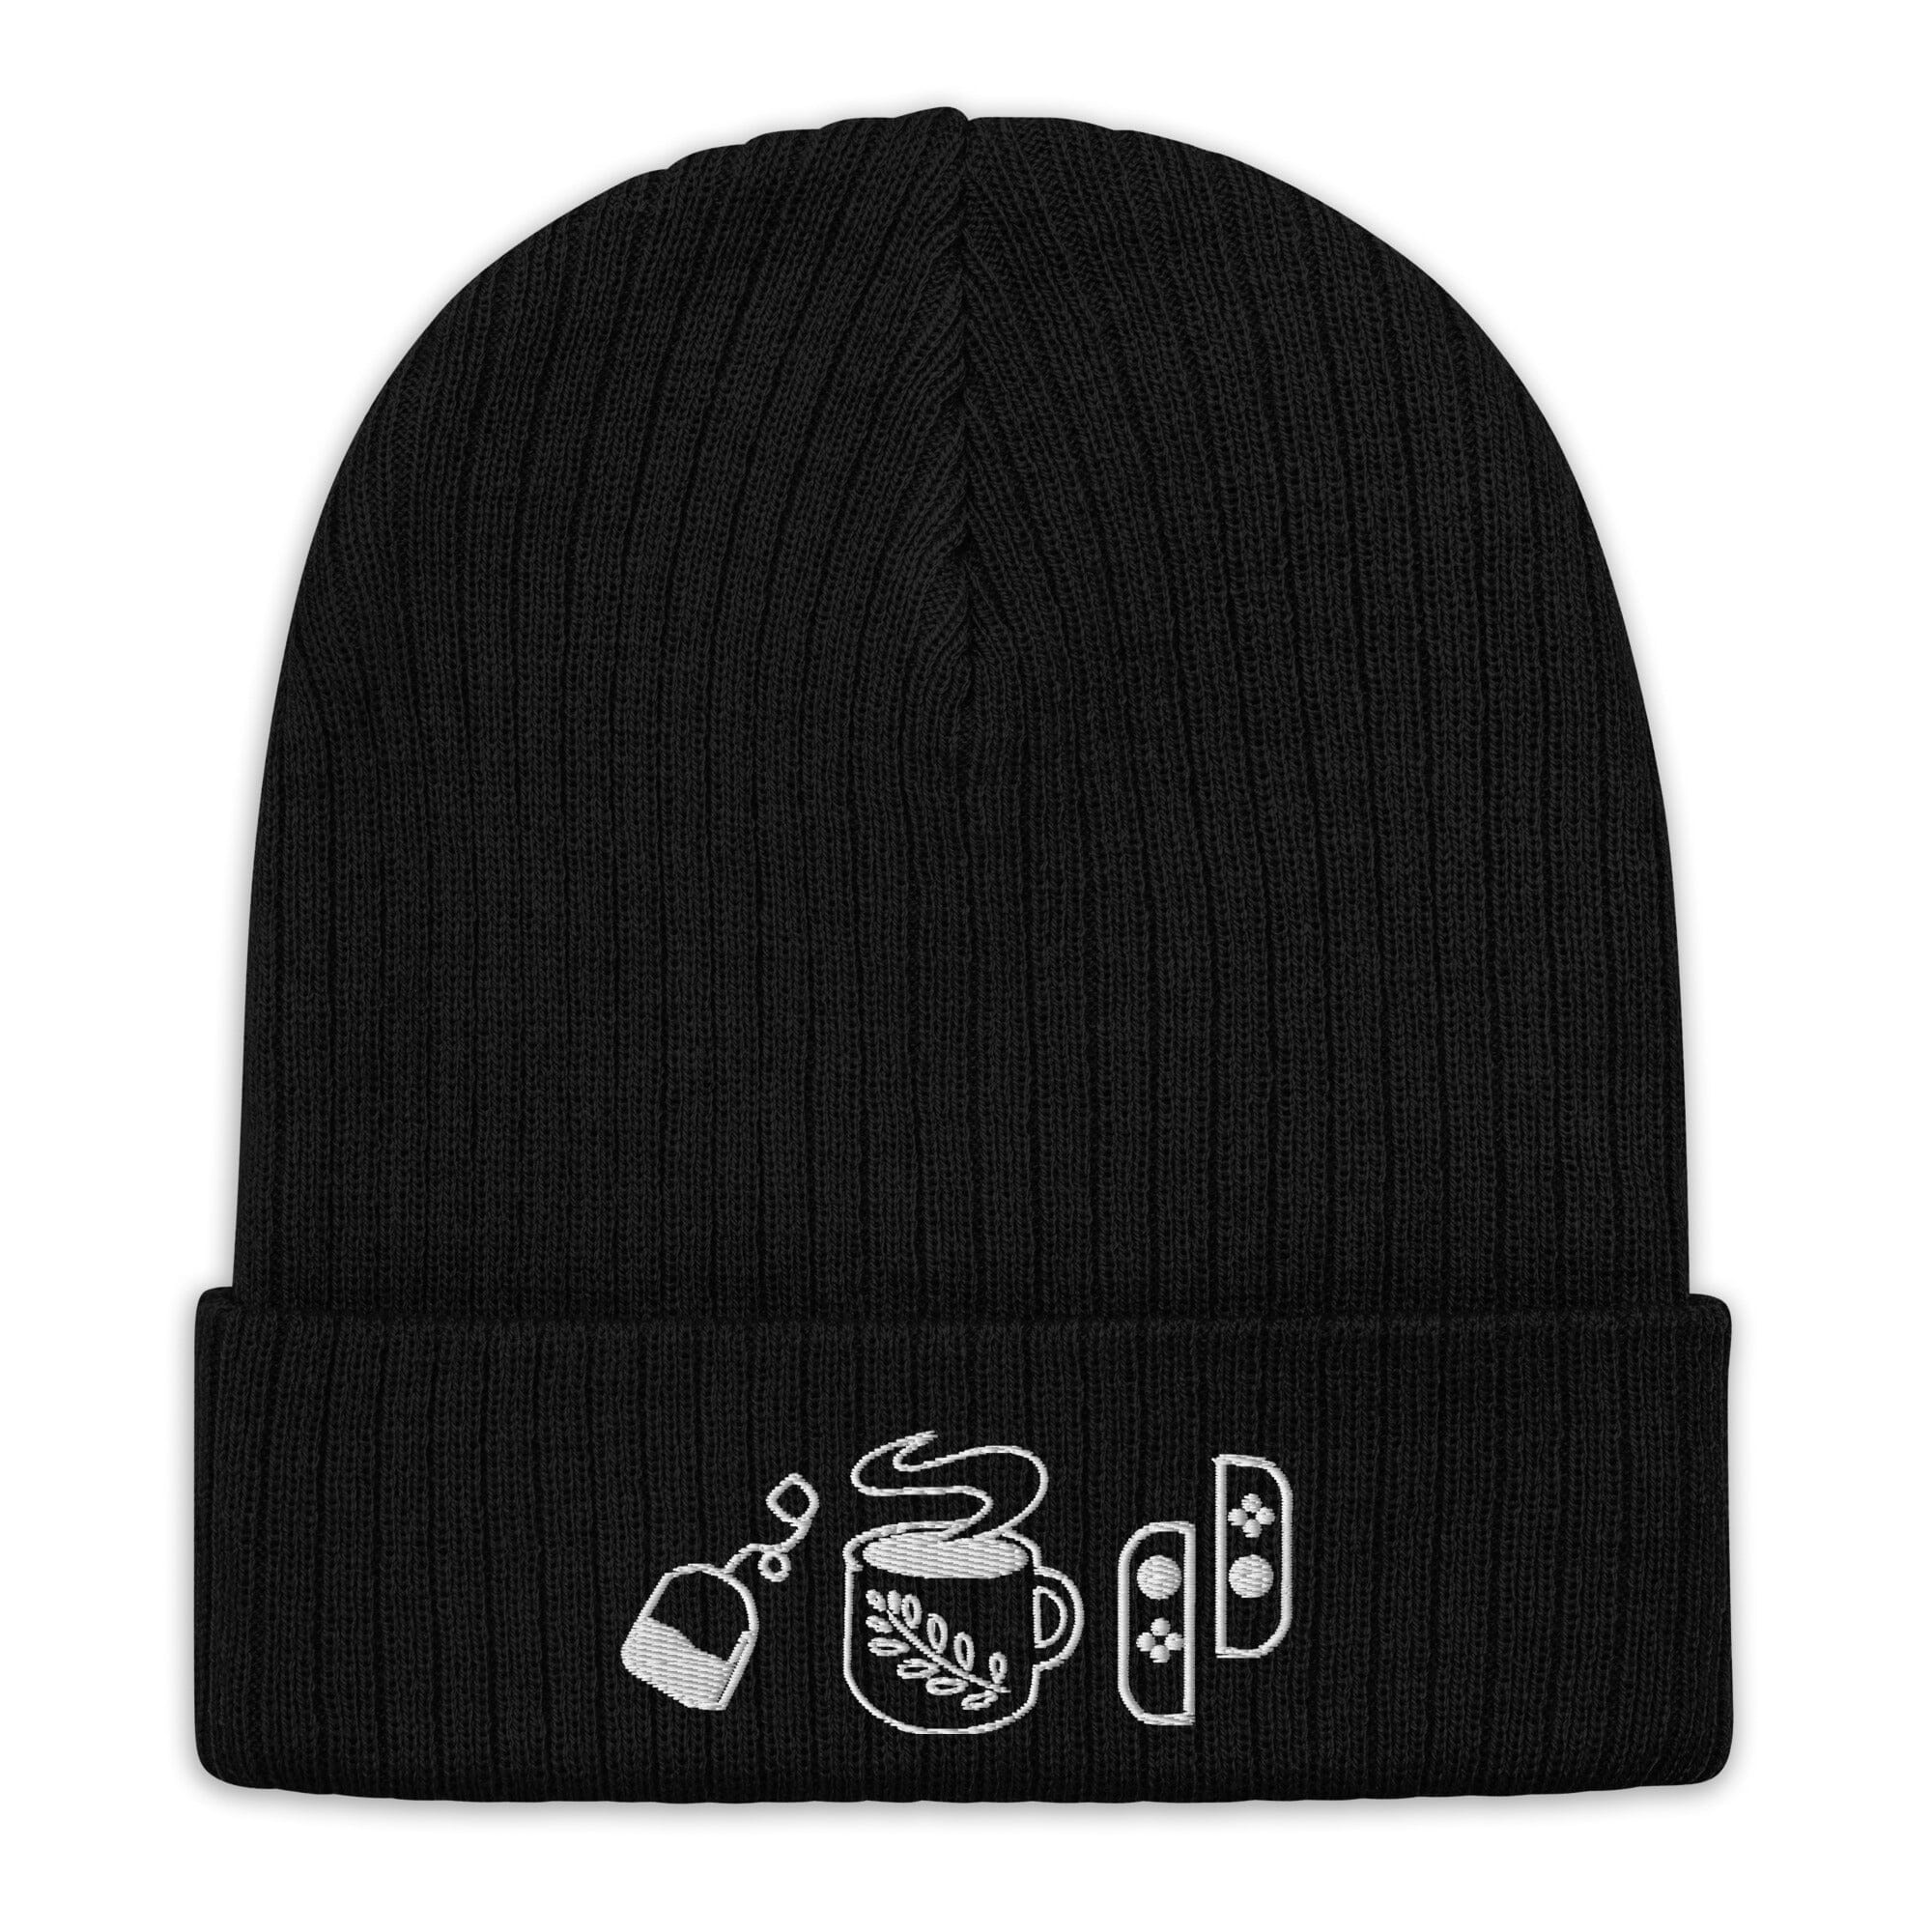 Cozy Hobbies | Ribbed knit beanie | Cozy Gamer Threads & Thistles Inventory Black 